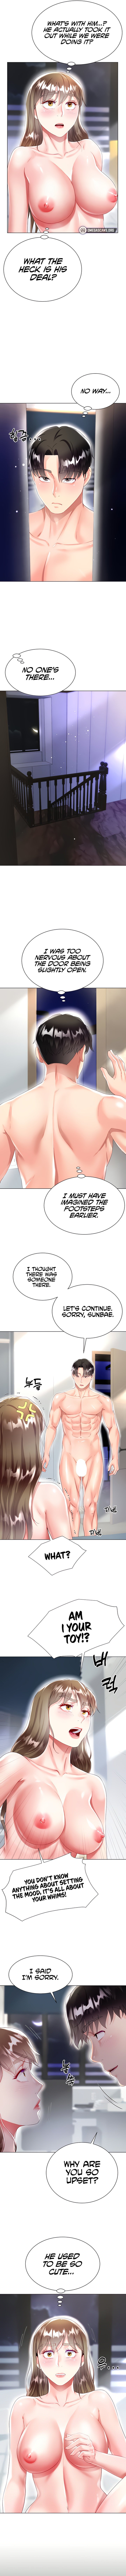 my-sister-in-laws-skirt-chap-31-2